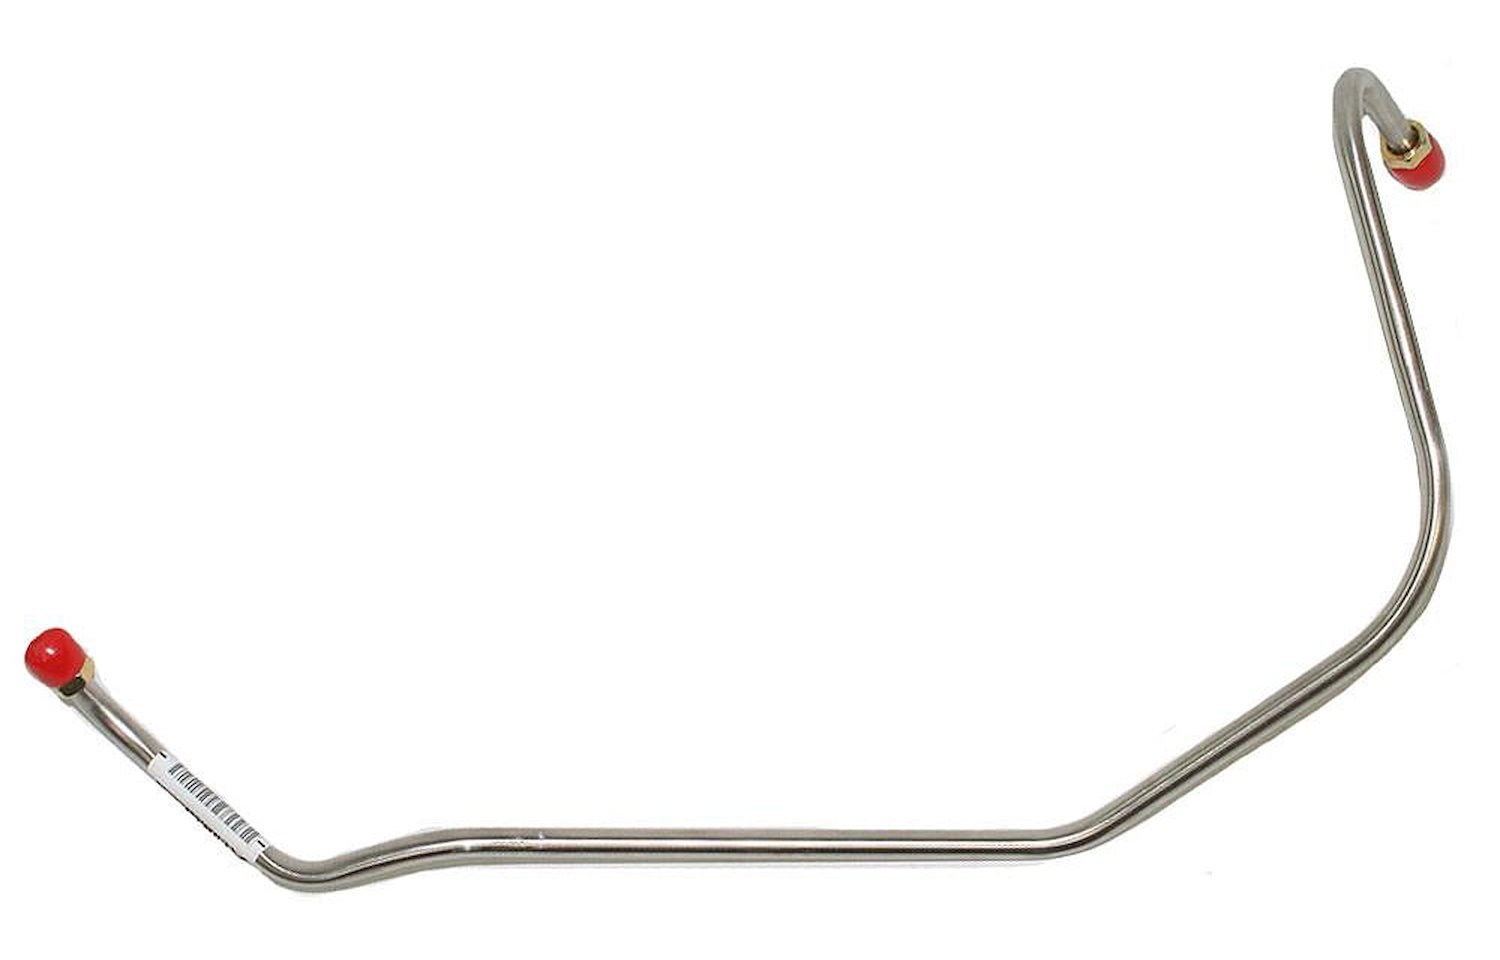 Fuel Line, Fuel Pump to Carburetor for Select 1971-1972 Chevrolet Models with 402 4-bbl Engine [Stainless Steel]